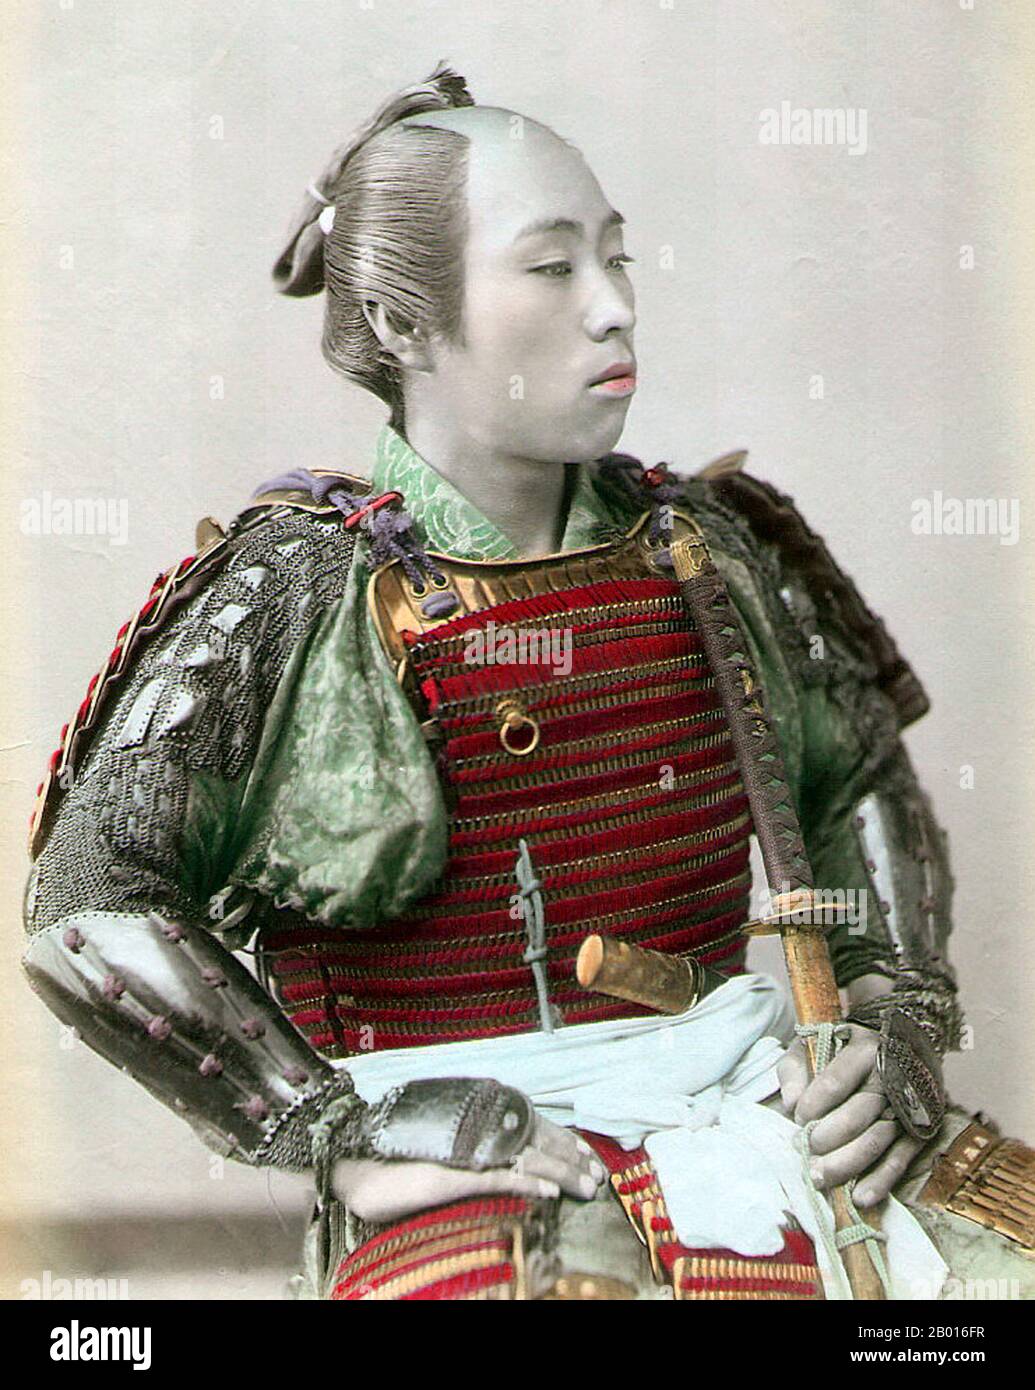 Japan: Hand-tinted photograph of a seated samurai, c. 1895.  Samurai is the term for the military nobility of pre-industrial Japan. By the end of the 12th century, samurai became almost entirely synonymous with bushi, and the word was closely associated with the middle and upper echelons of the warrior class. The samurai followed a set of rules that came to be known as Bushidō. While they numbered less than ten percent of Japan's population, samurai teachings can still be found today in both everyday life and in martial arts such as Kendō, meaning the way of the sword. Stock Photo